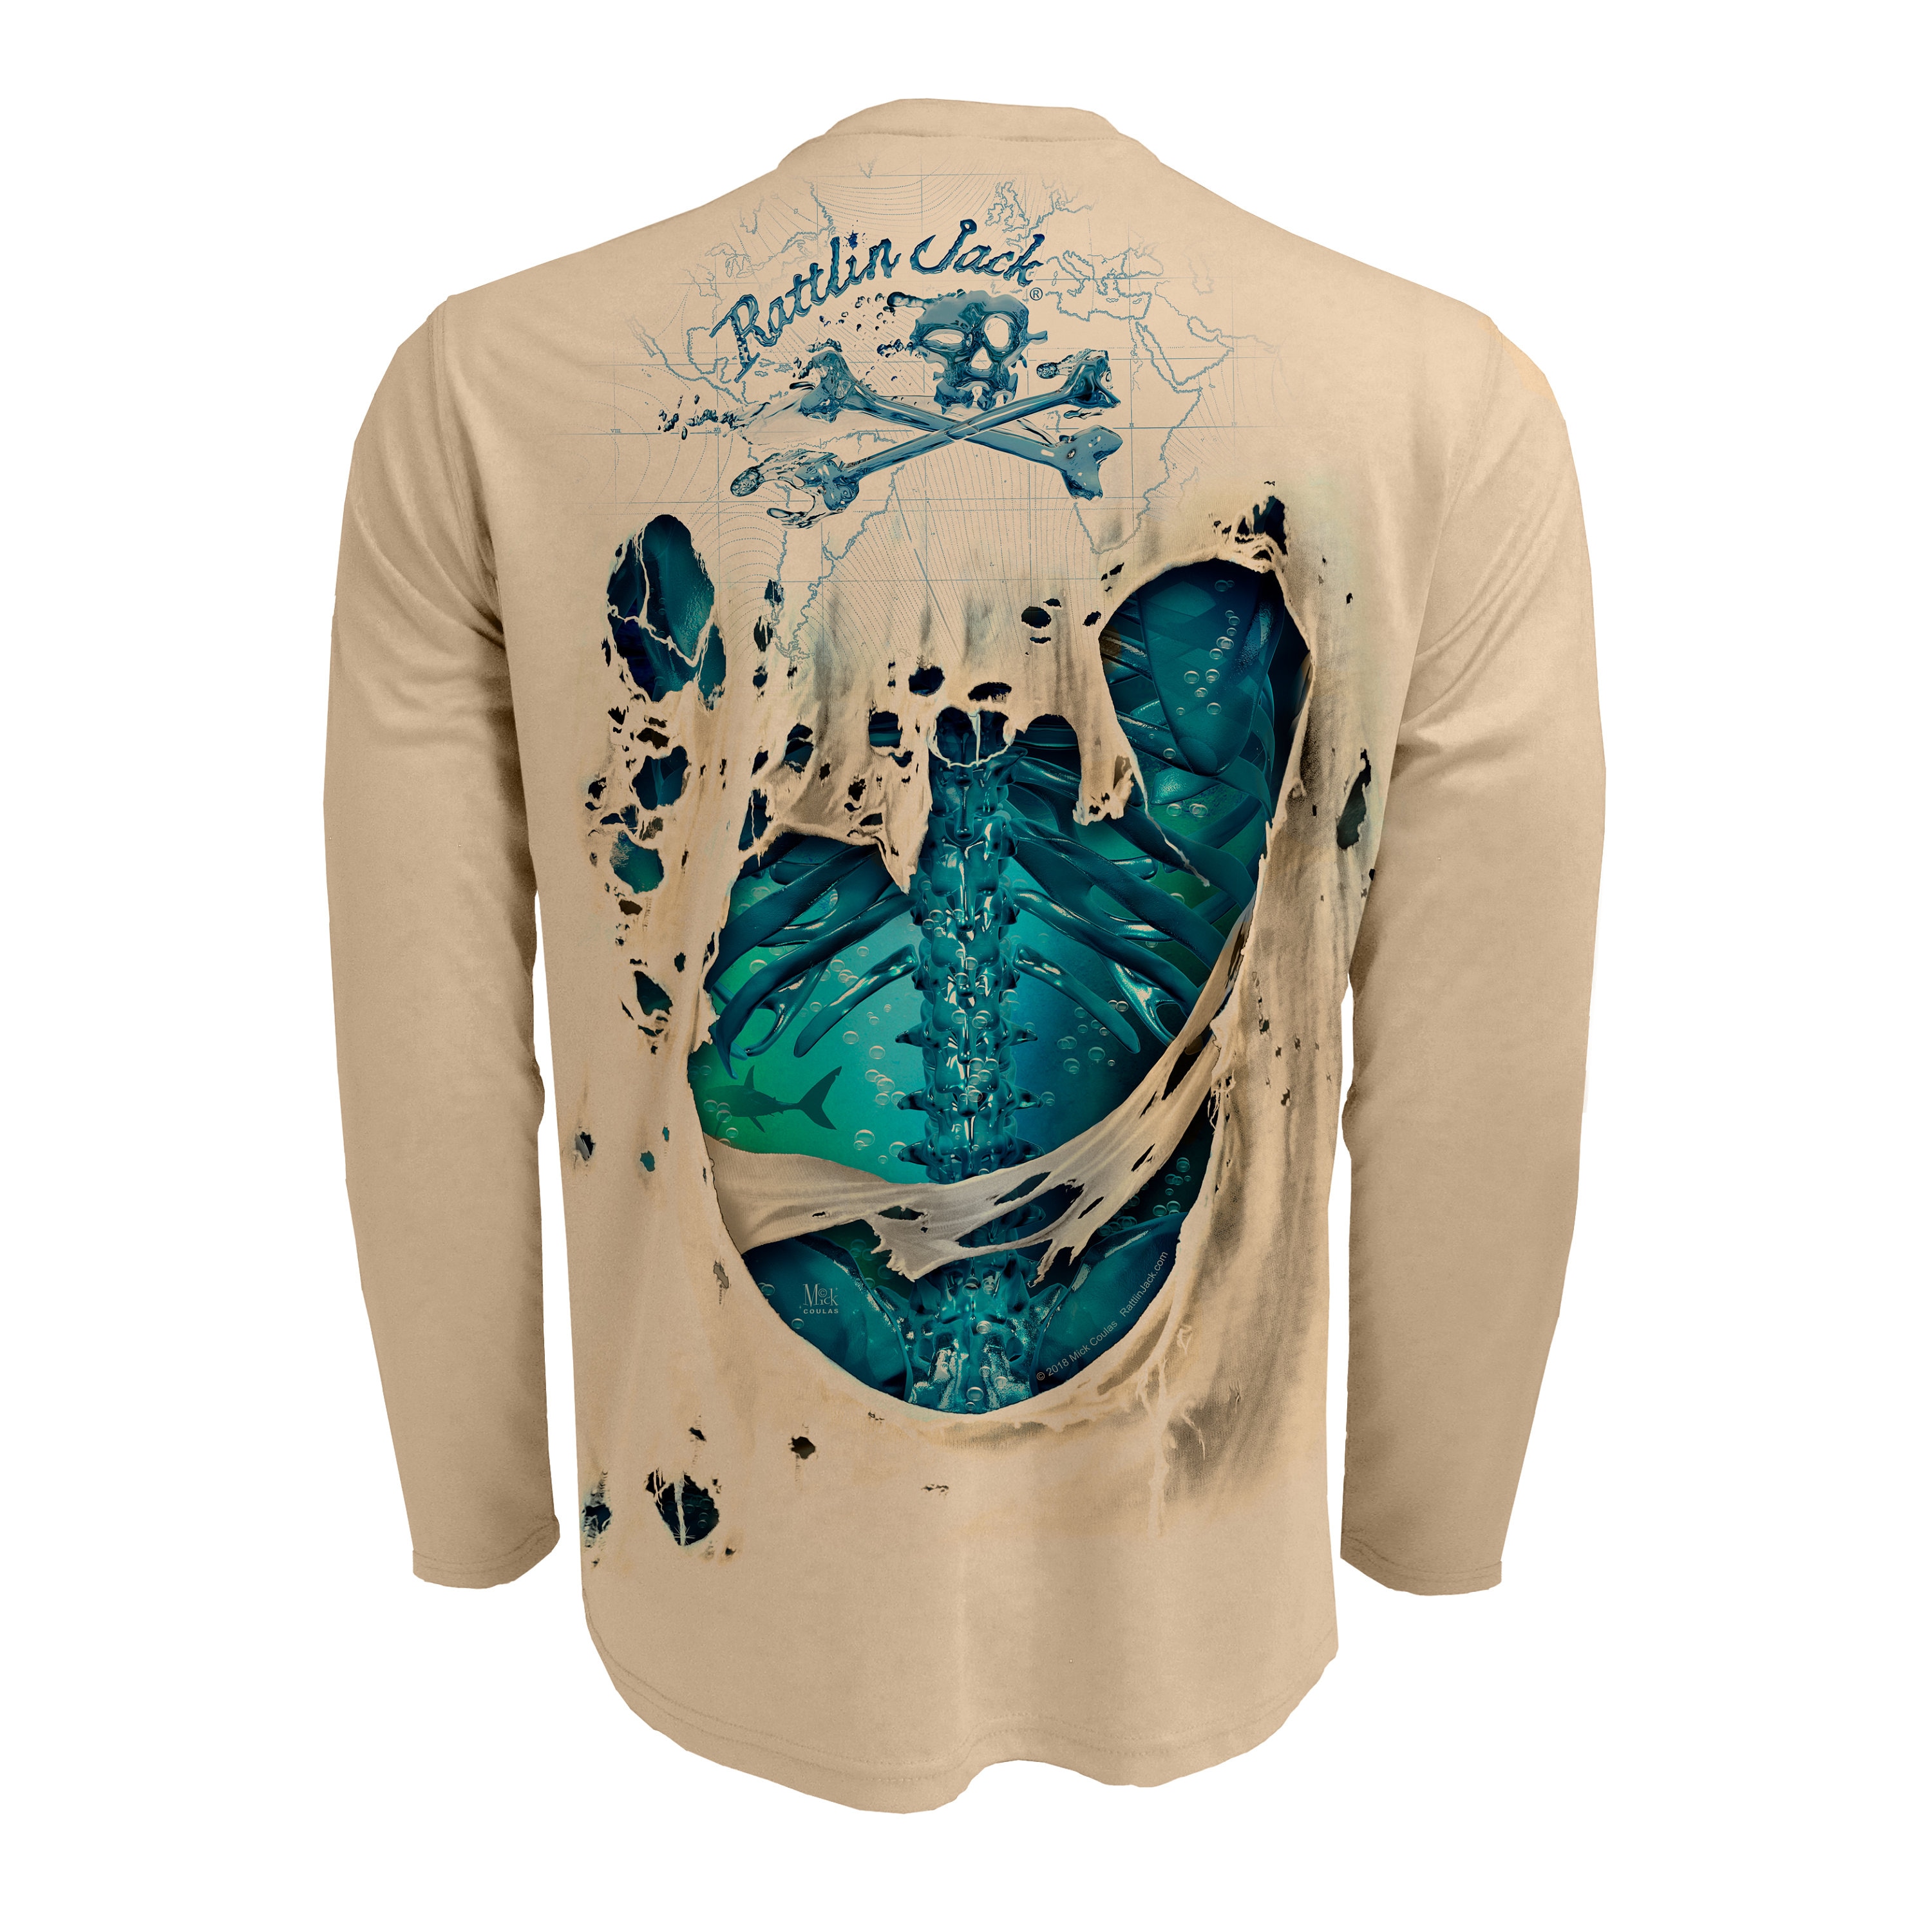 Sublimation Fishing Long Sleeve Shirt Custom Design Your Own Quick Dry Tournament  Fishing Shirt - China Full Sublimated and Digital Printing price